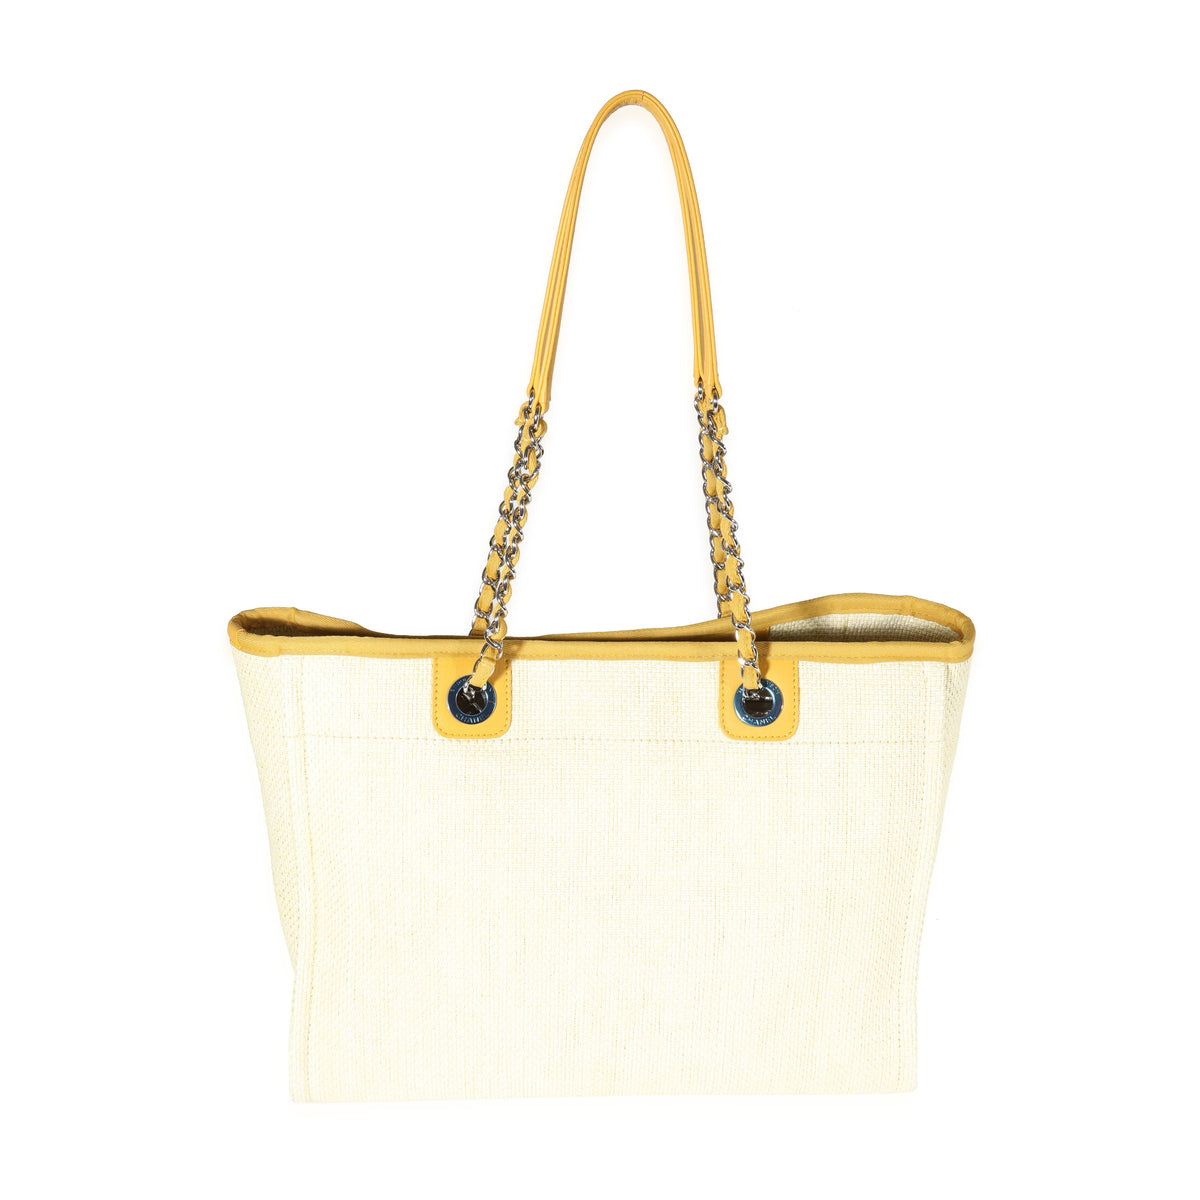 Chanel Yellow Raffia Deauville Shopping Tote Bag Chanel